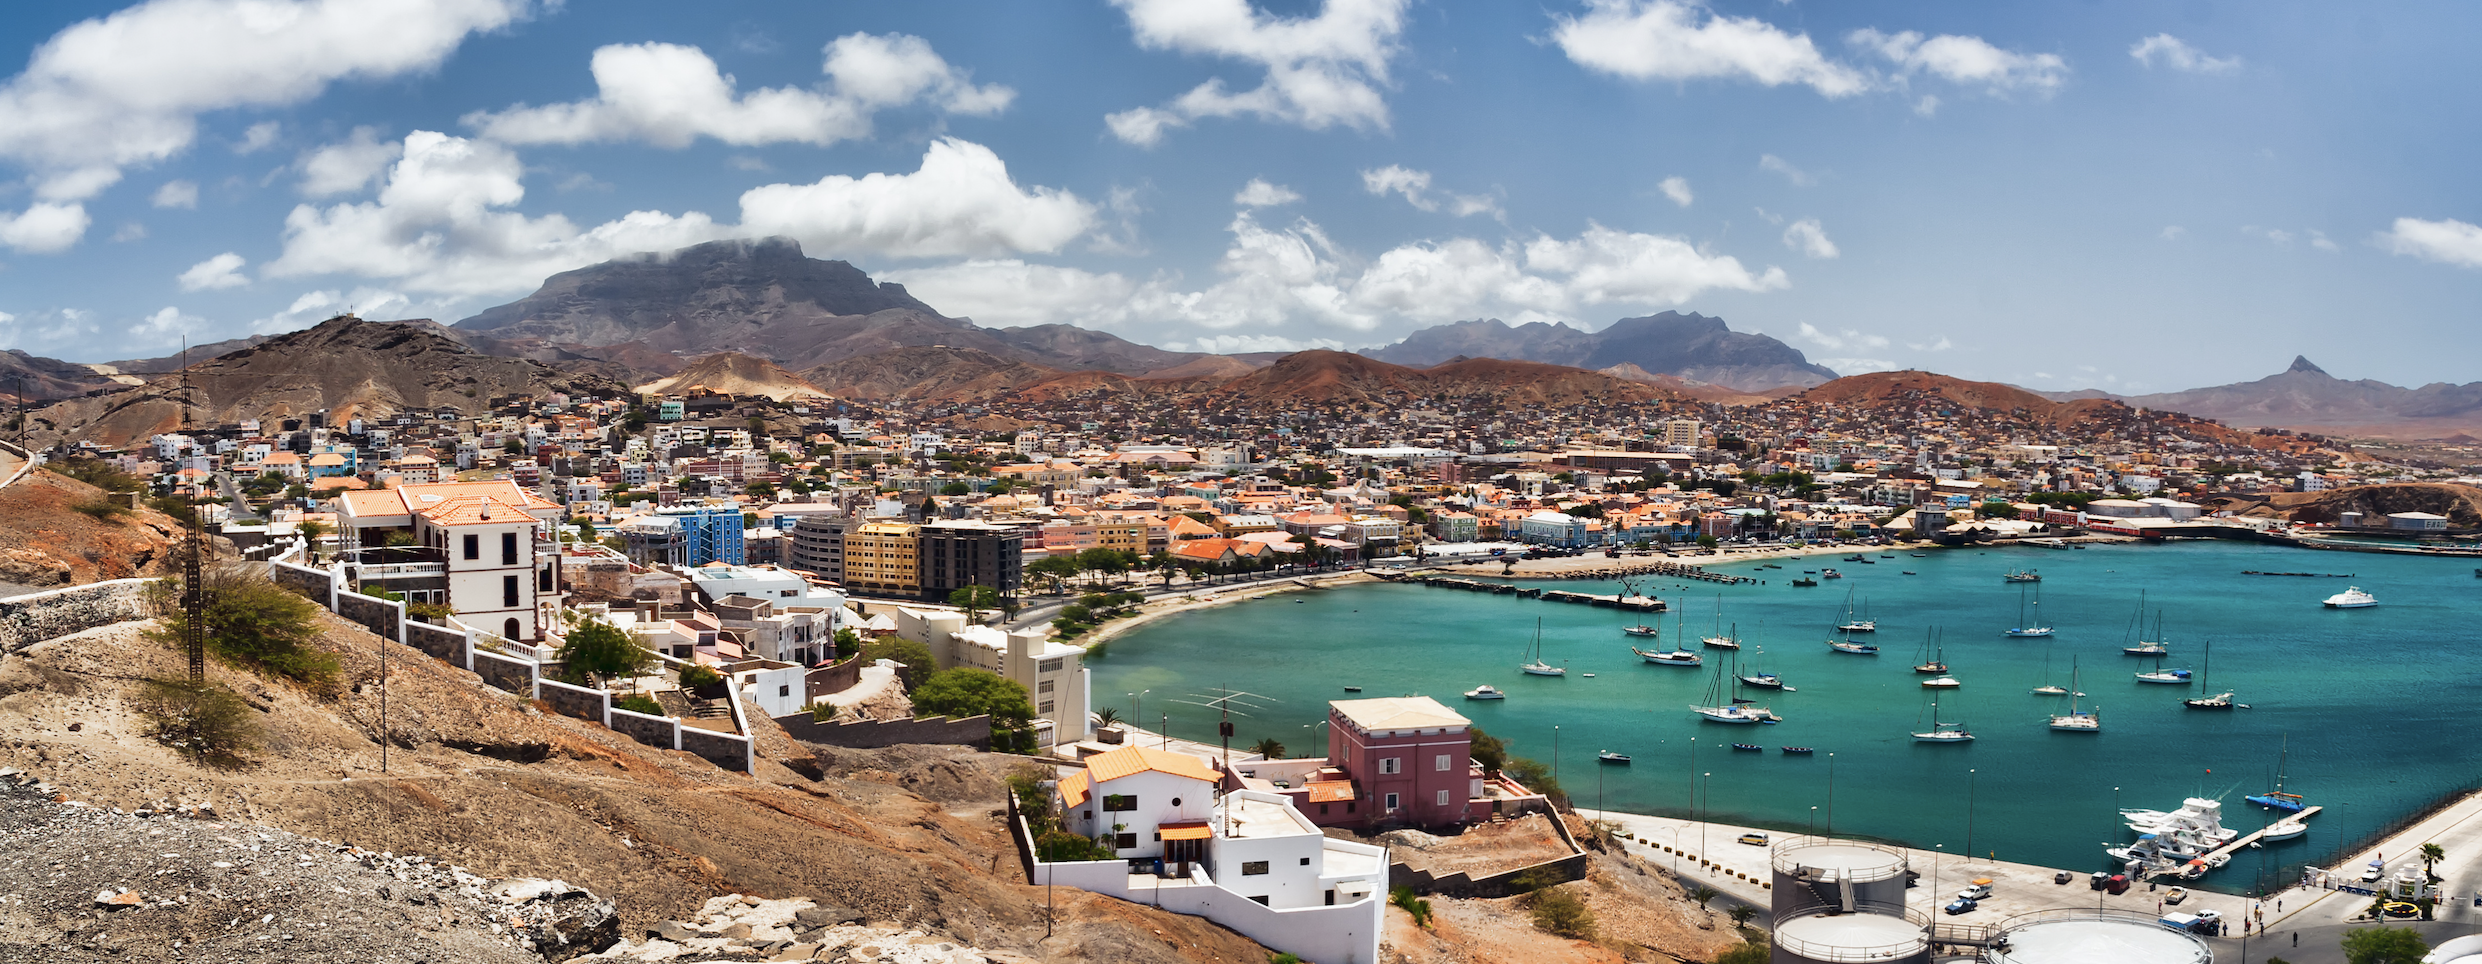 an image of the harbour of Mindelo, Cabo Verde